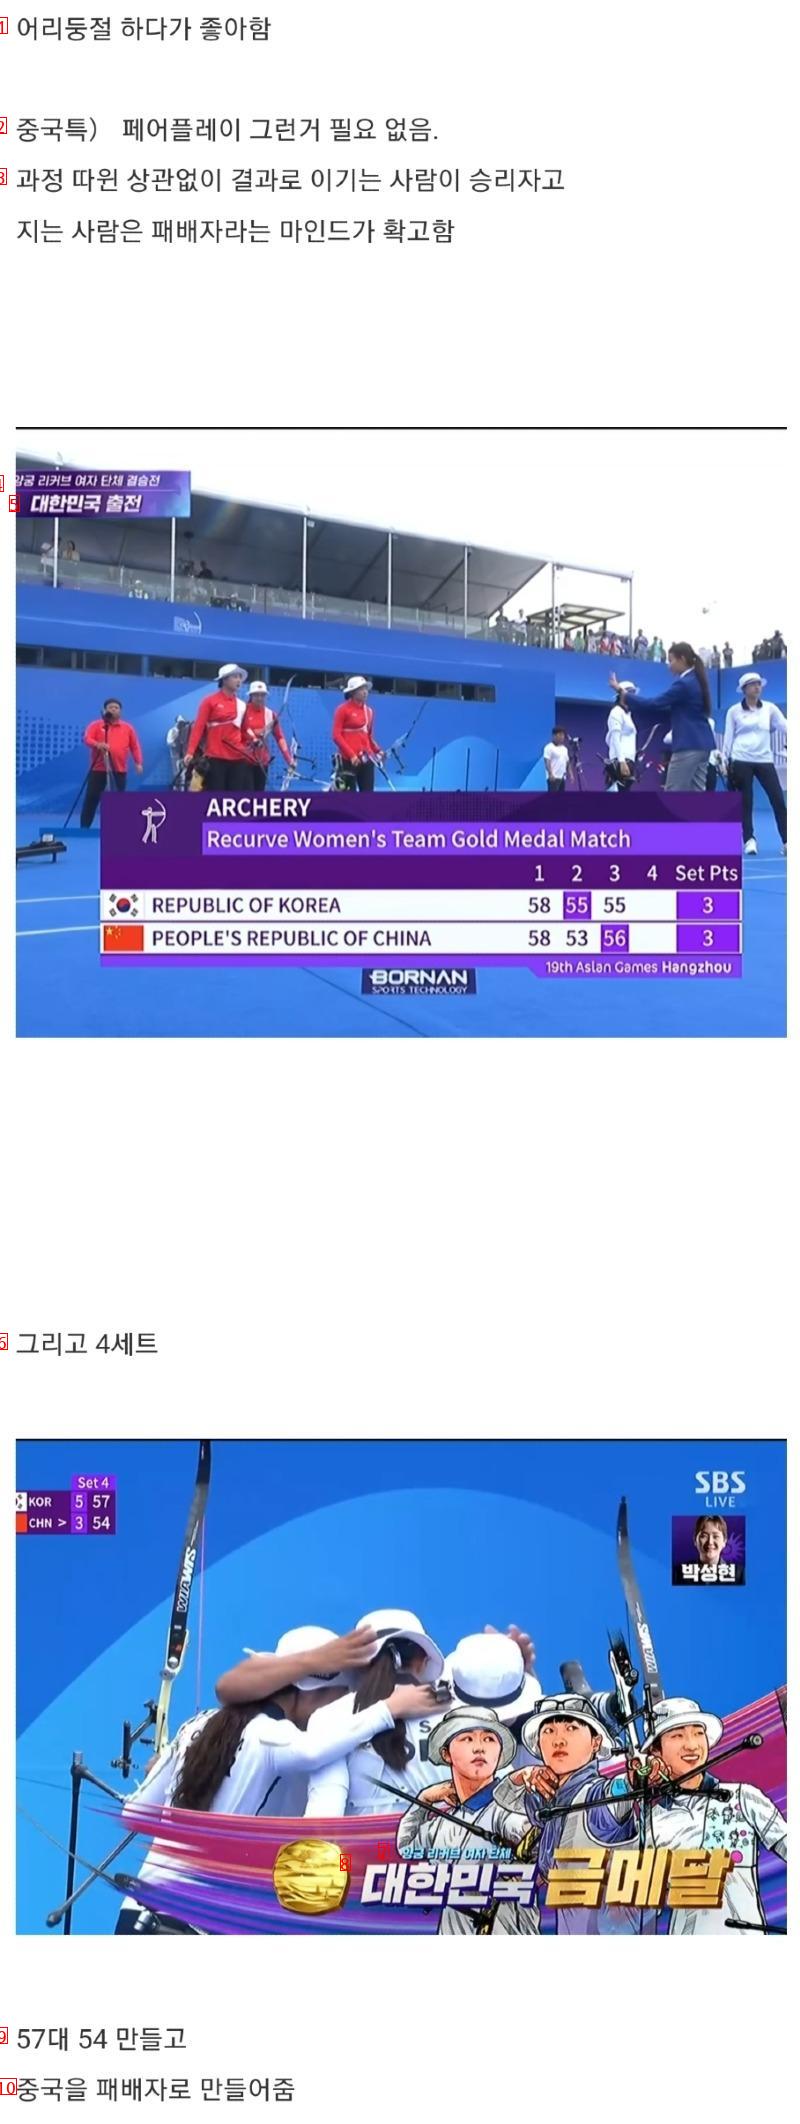 China Fascinating for a Gold Medal in Archery